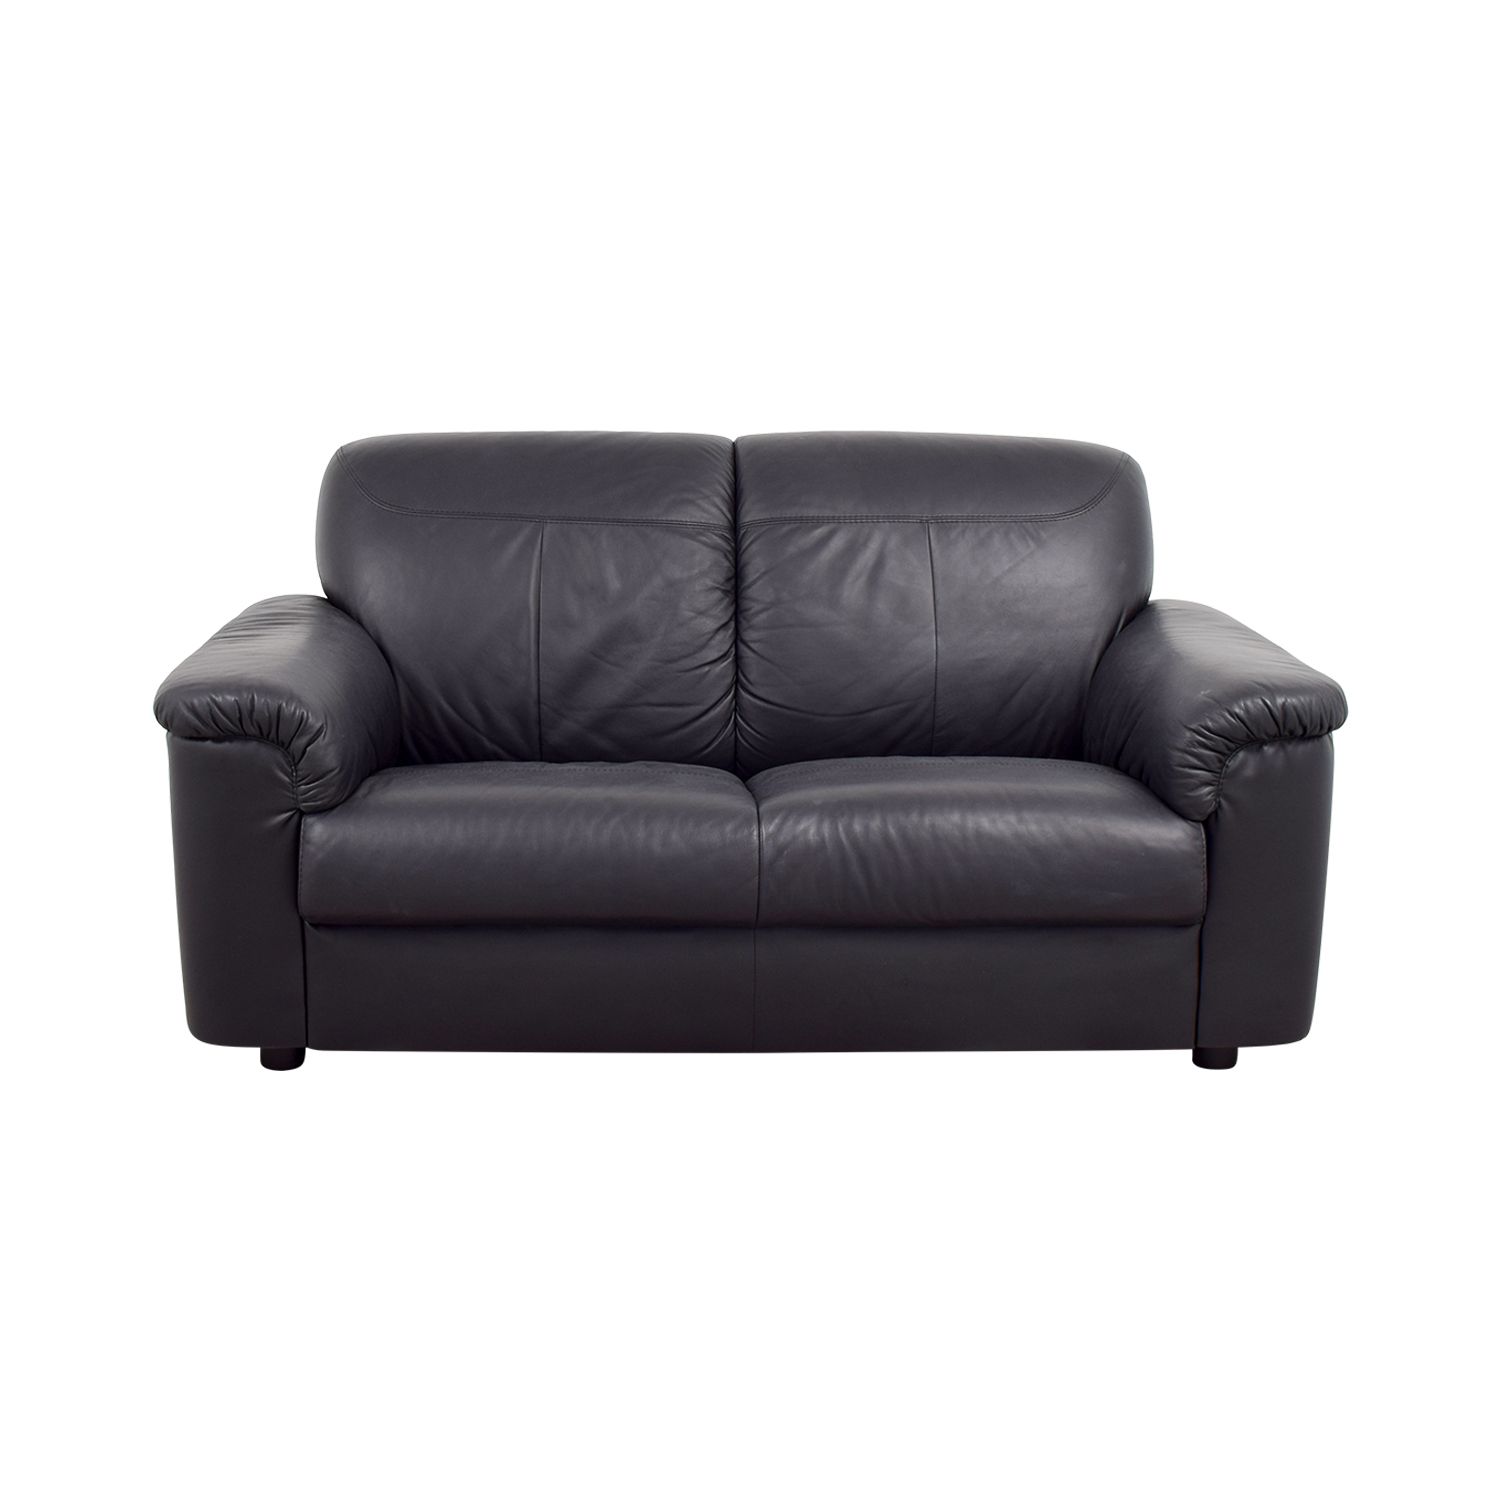 81% Off – Ikea Ikea Black Leather Loveseat With Pillowed Throughout Most Up To Date Leather Bench Sofas (Photo 13 of 14)